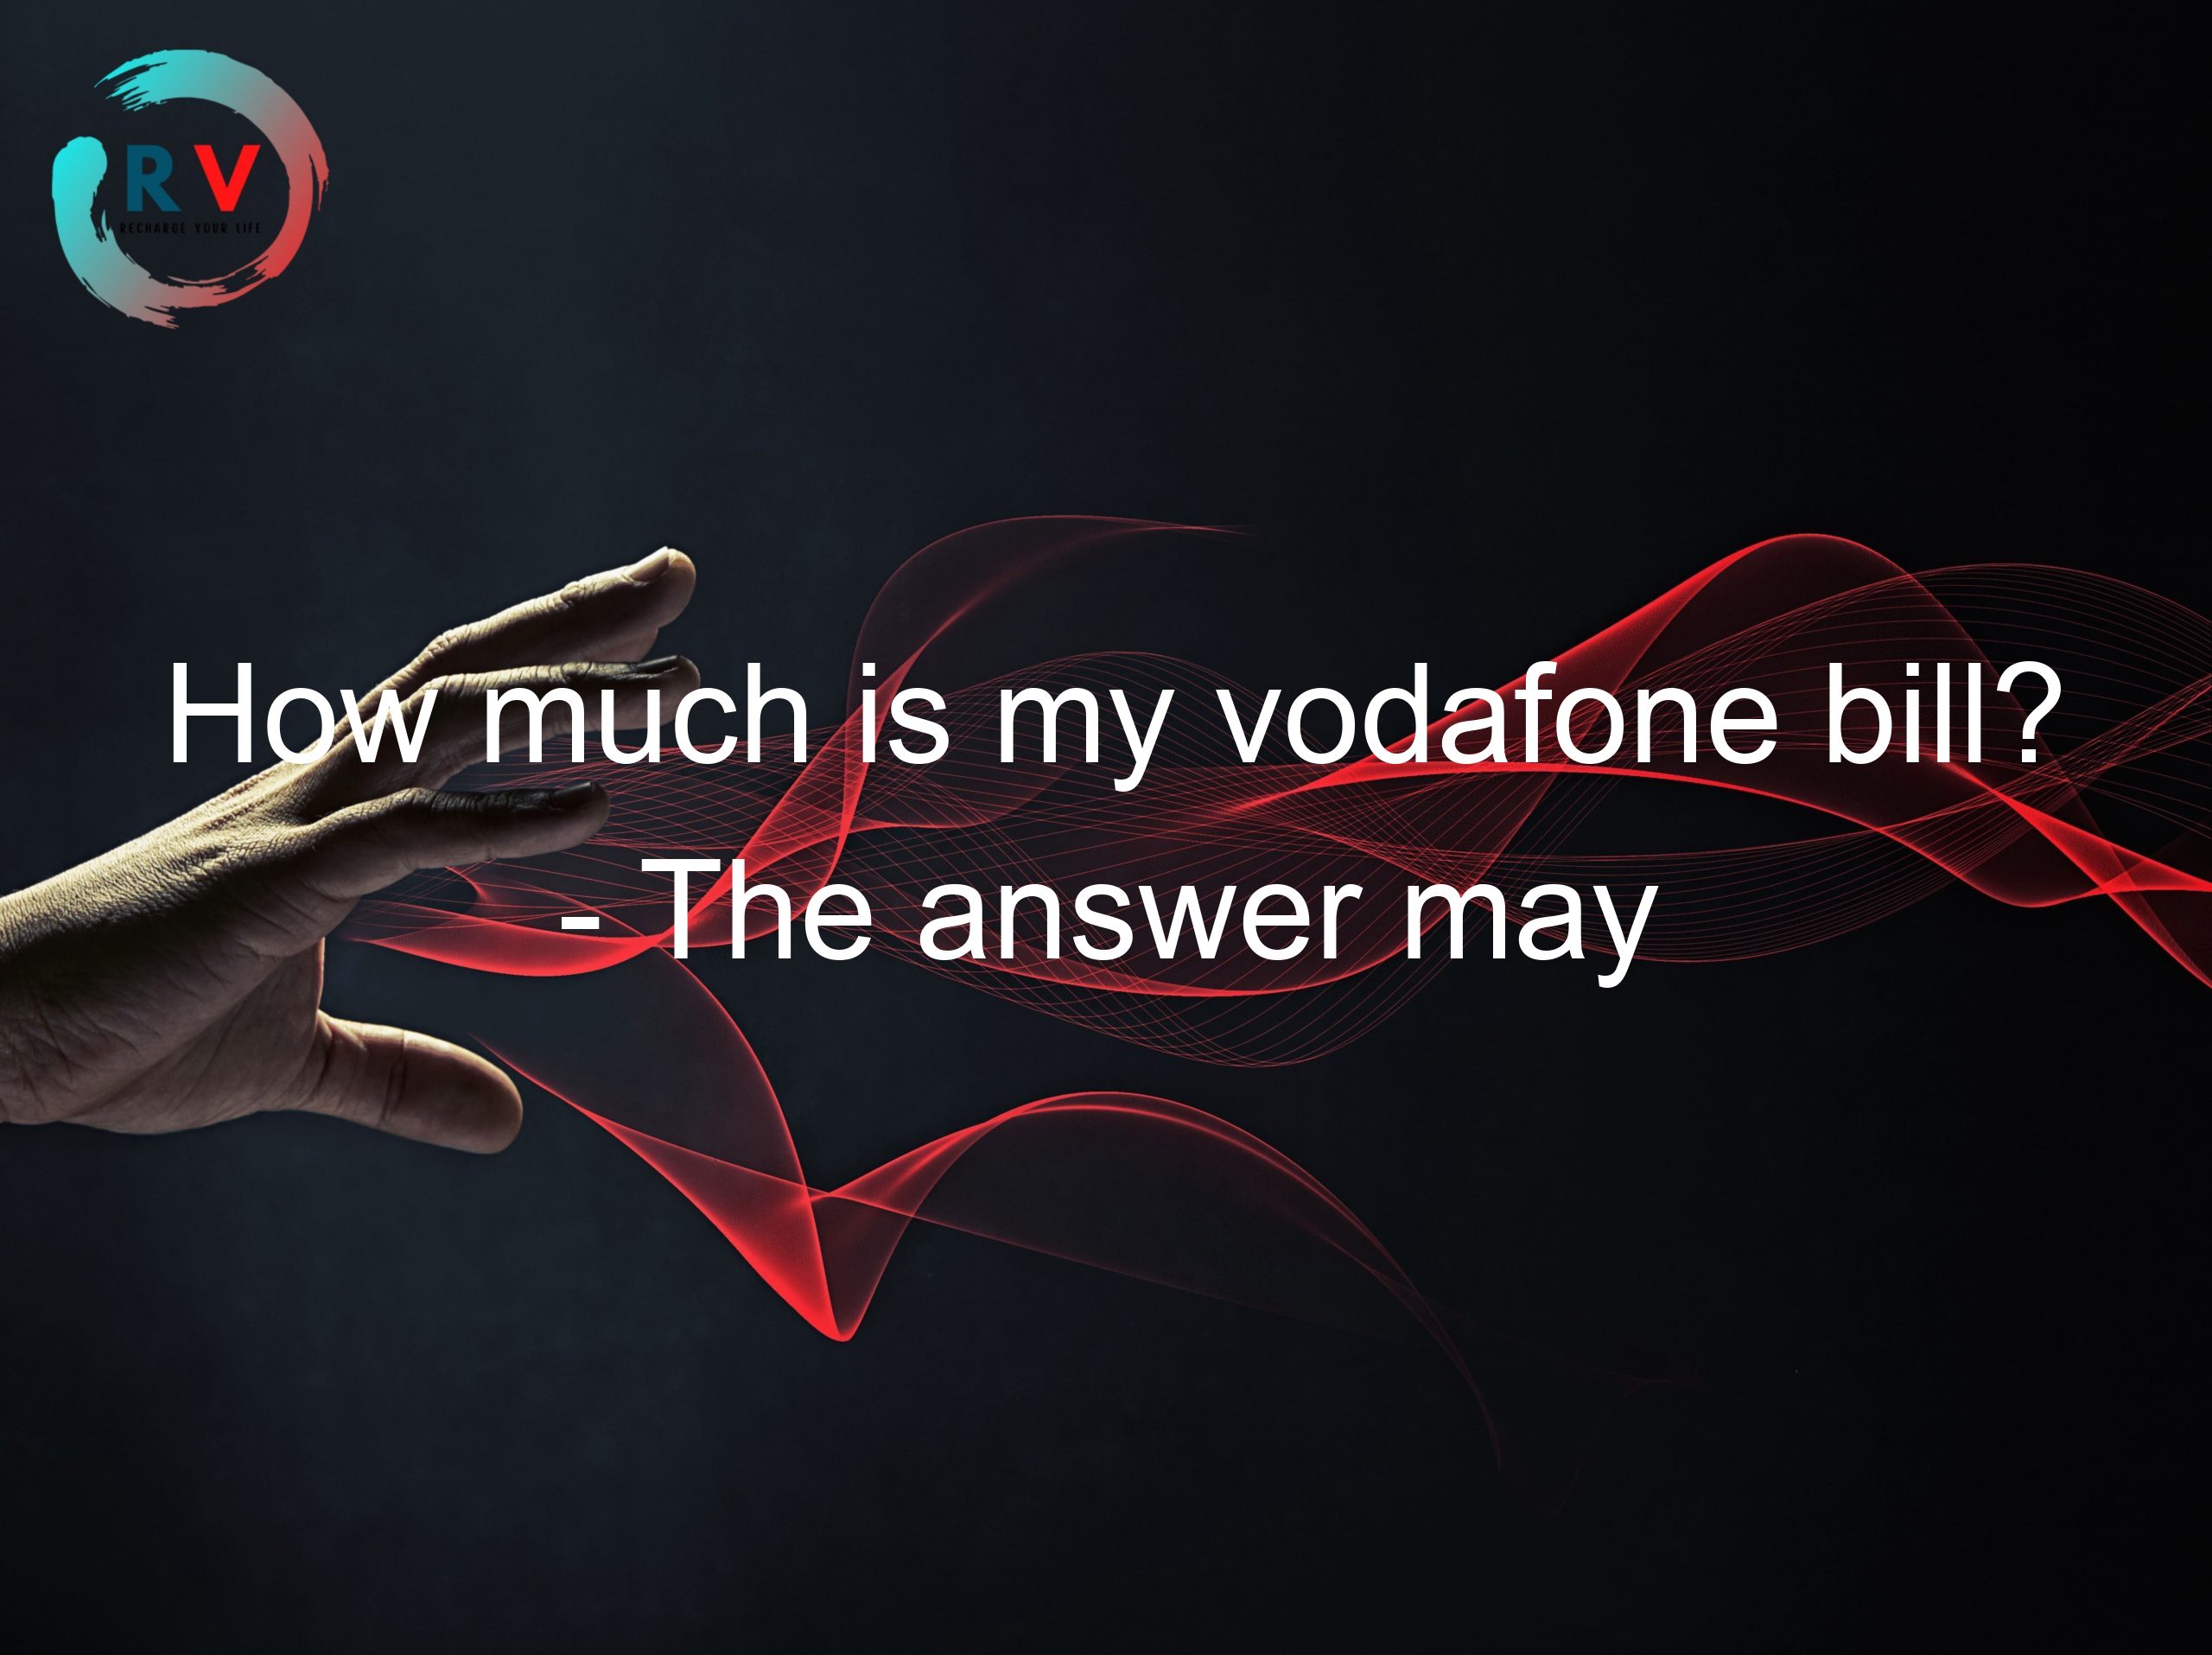 How much is my vodafone bill? - The answer may surprise you!